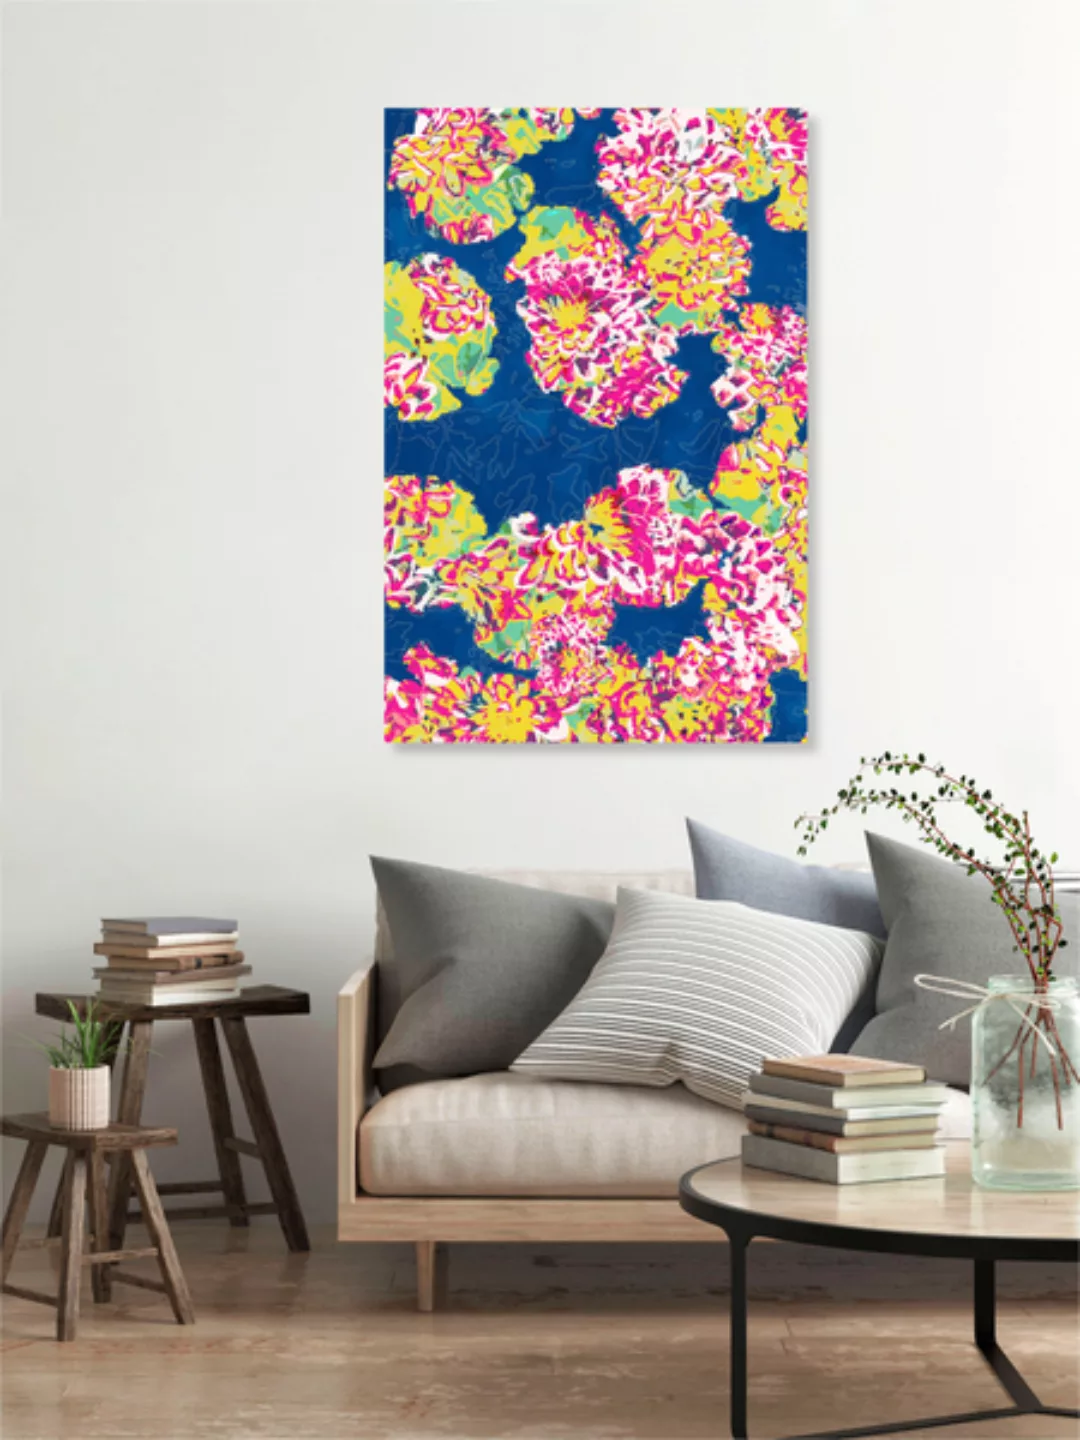 Poster / Leinwandbild - The Soul Becomes The Color Of Its Thoughts günstig online kaufen